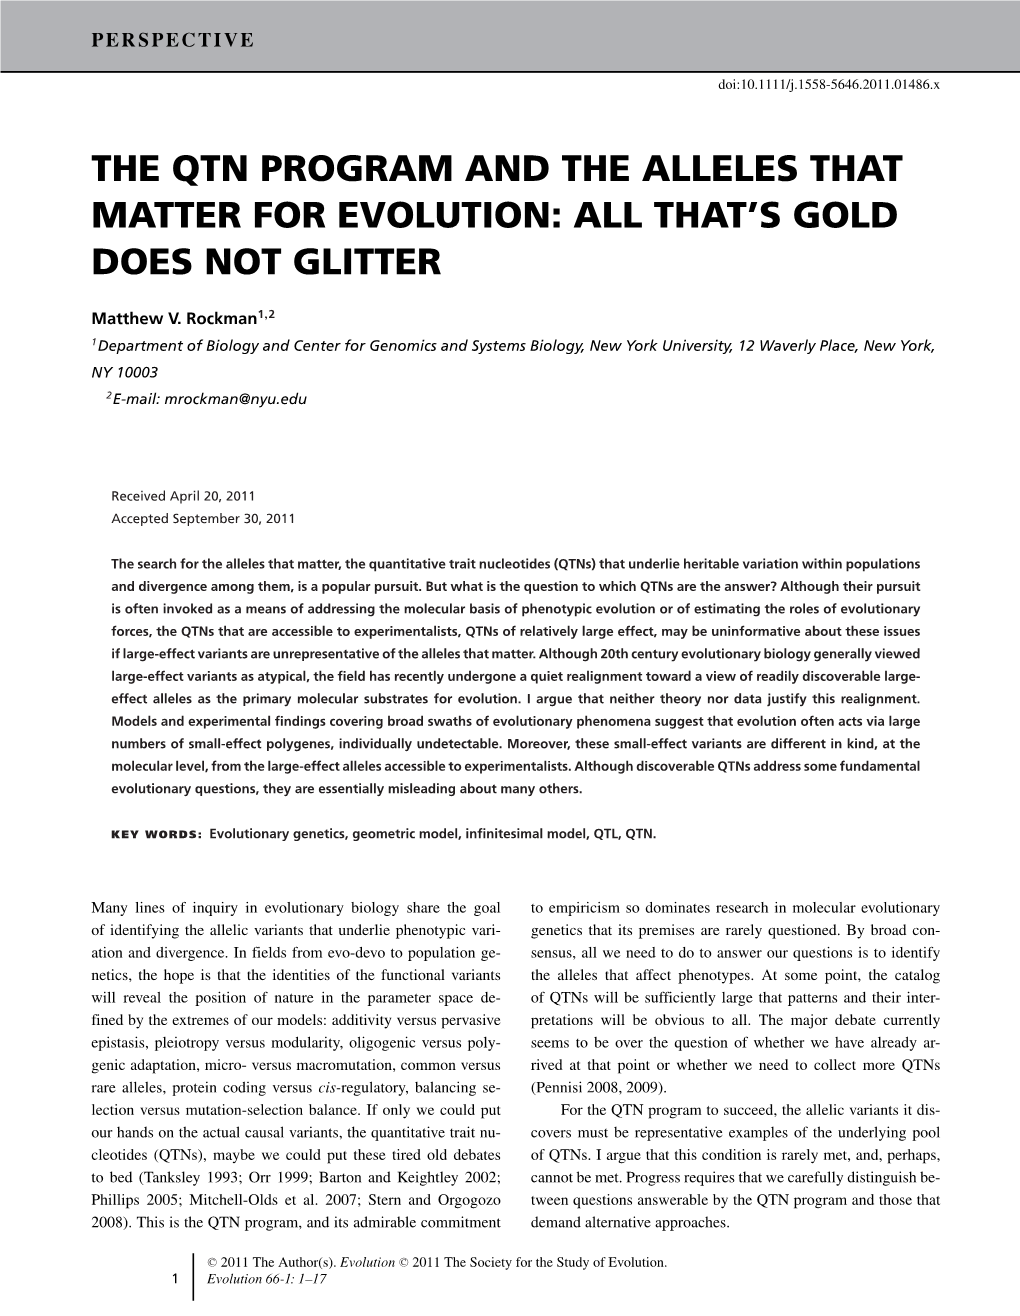 The Qtn Program and the Alleles That Matter for Evolution: All That’S Gold Does Not Glitter